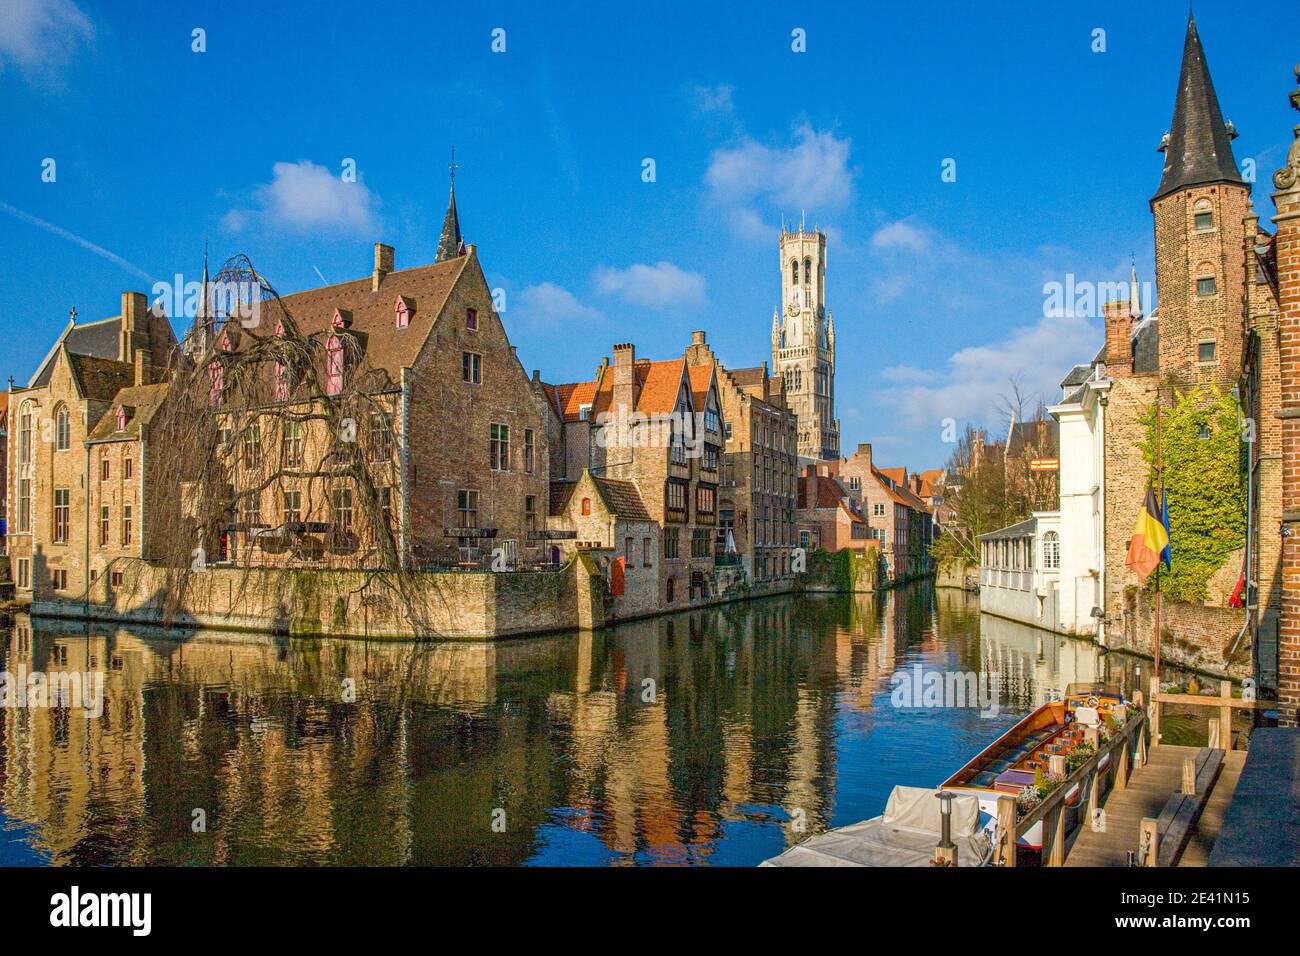 View from the Rozenhoedkaai canal in the Mediaeval city of Bruges in Belgium Stock Photo